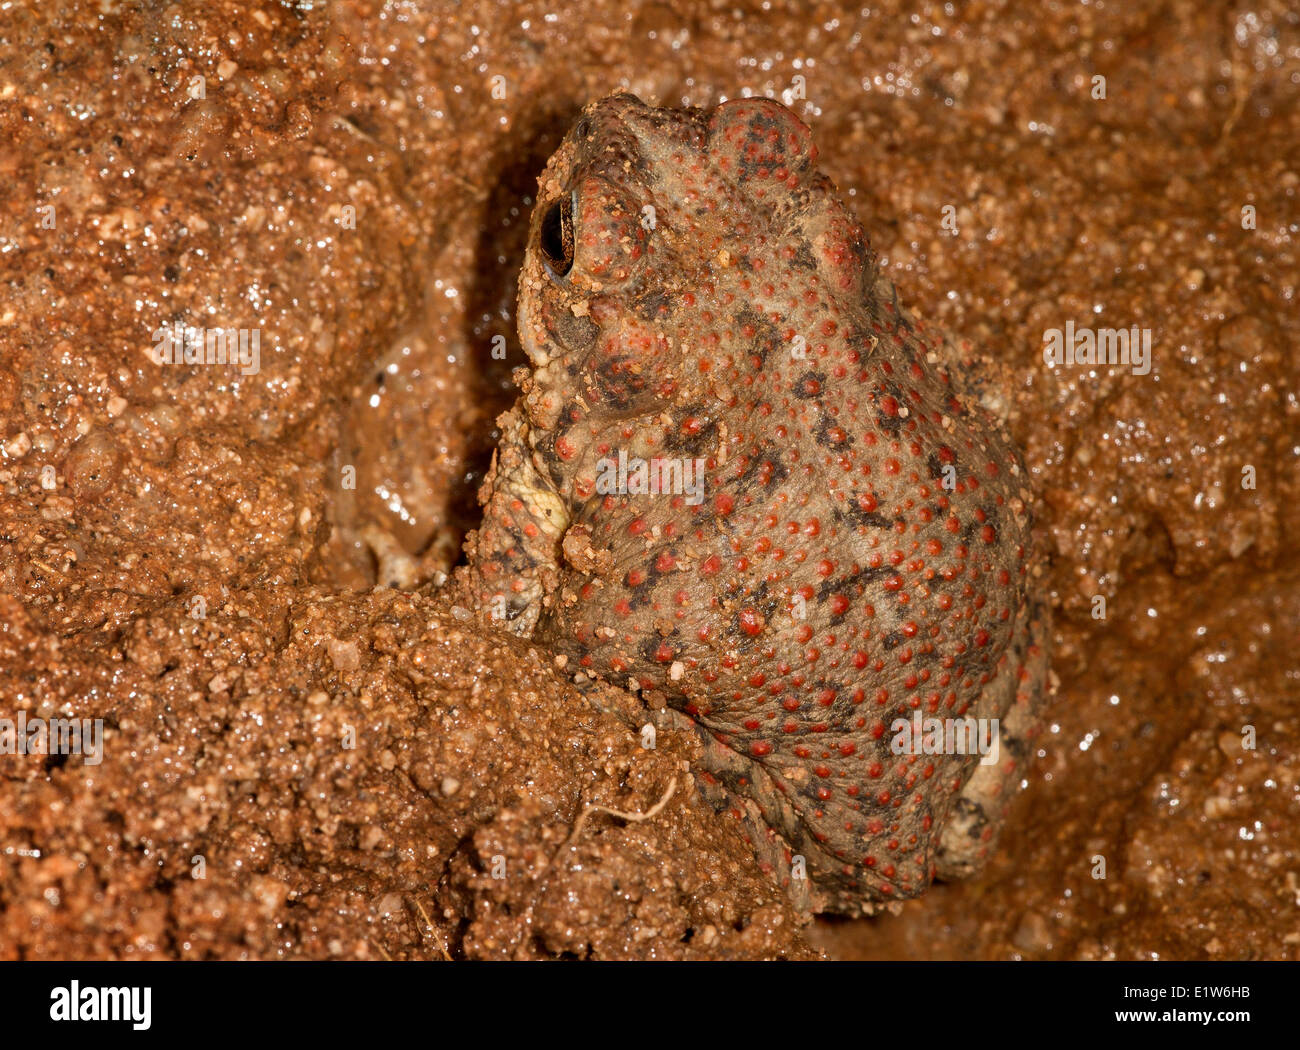 Red-spotted toad (Bufo punctatus), buried in sand, Amado, Arizona. (temporarily captive) Stock Photo